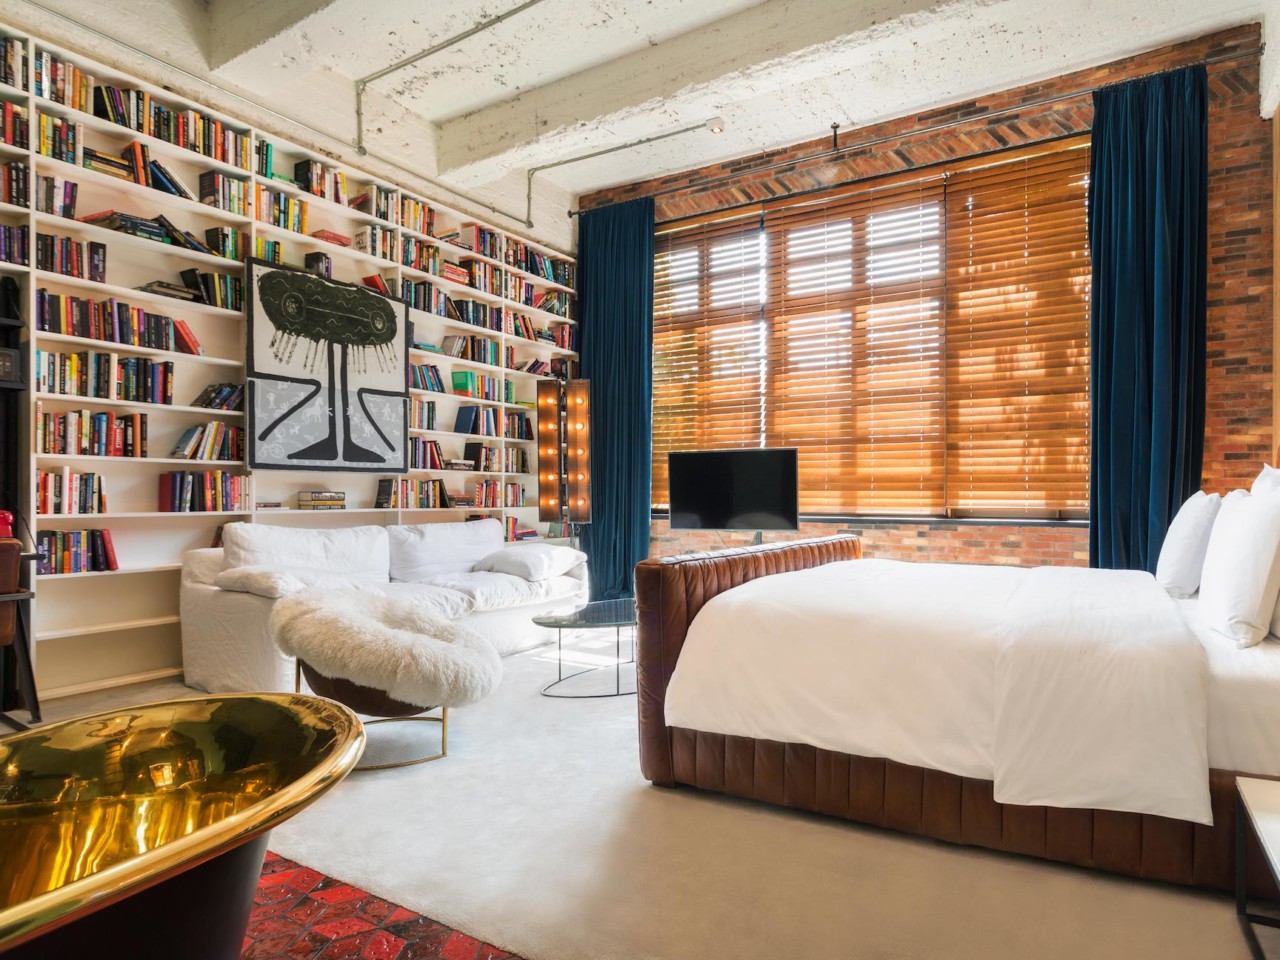 In Tbilisi, Stamba Hotel Takes a Page from a Former Soviet Printing Press